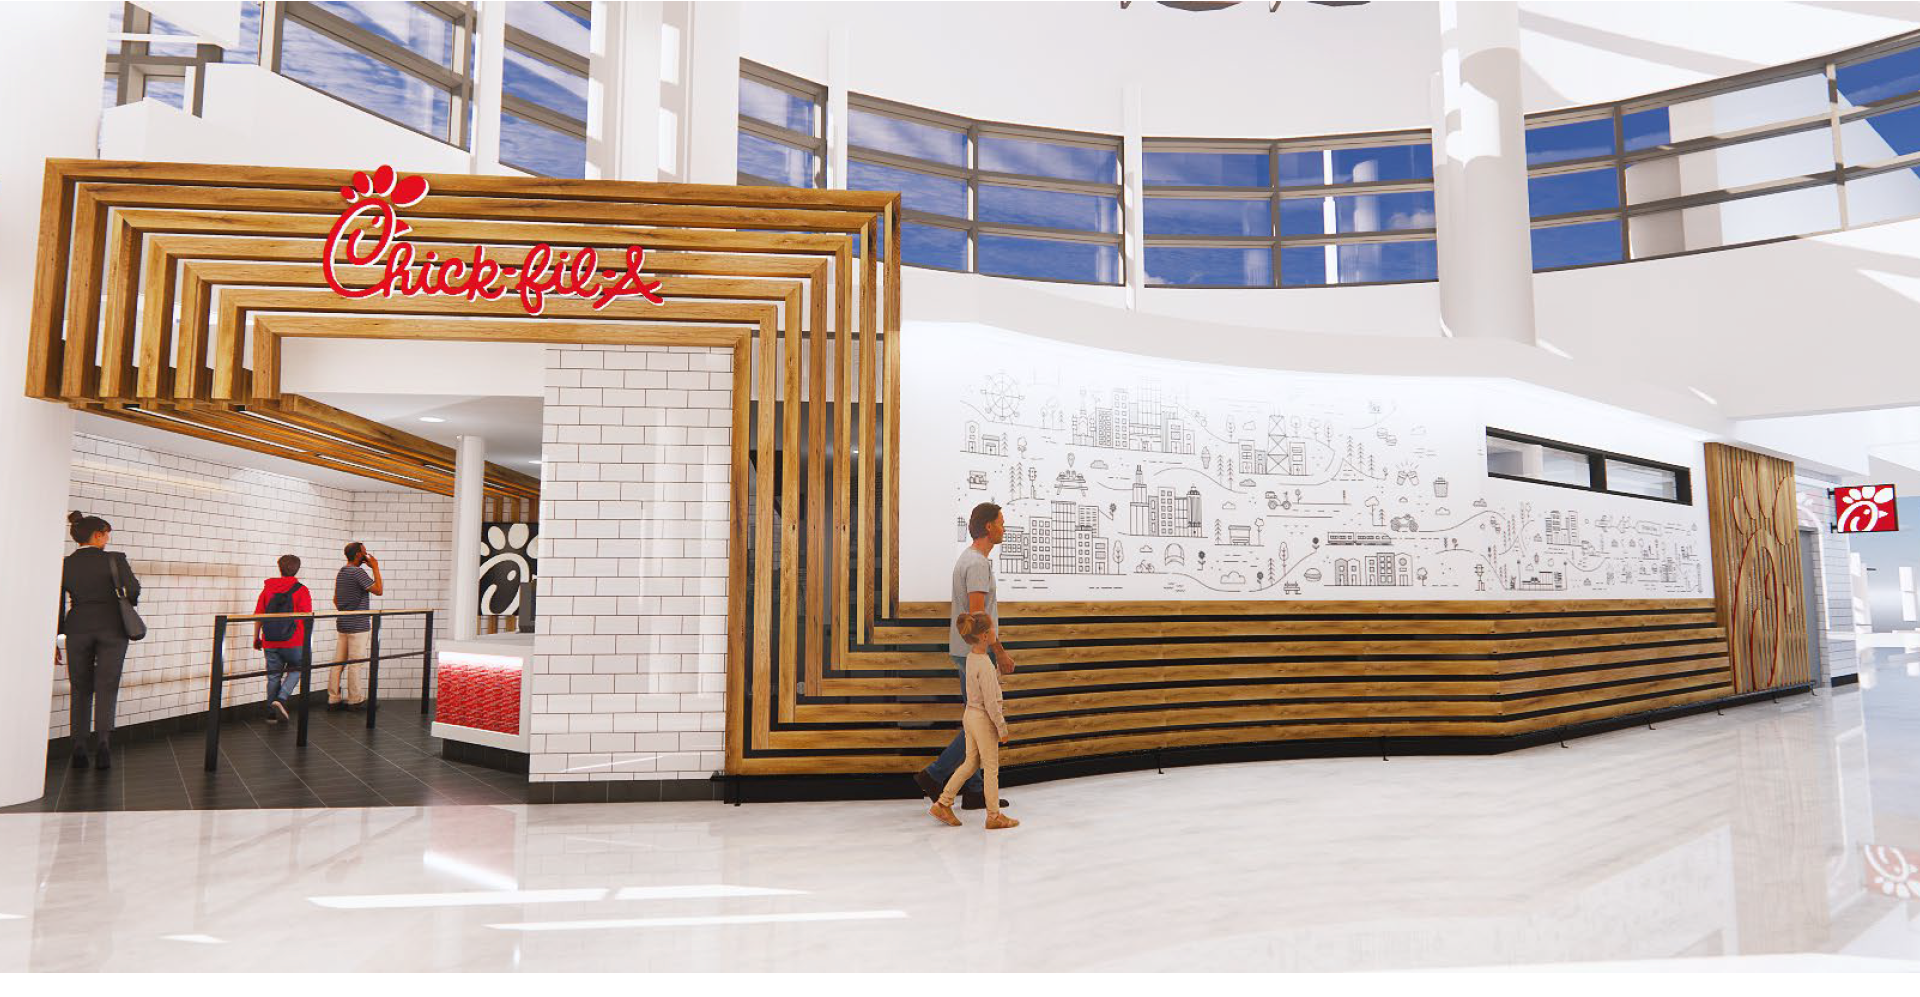 First Chick-fil-A and Protein Bar & Kitchen Landing at O’Hare